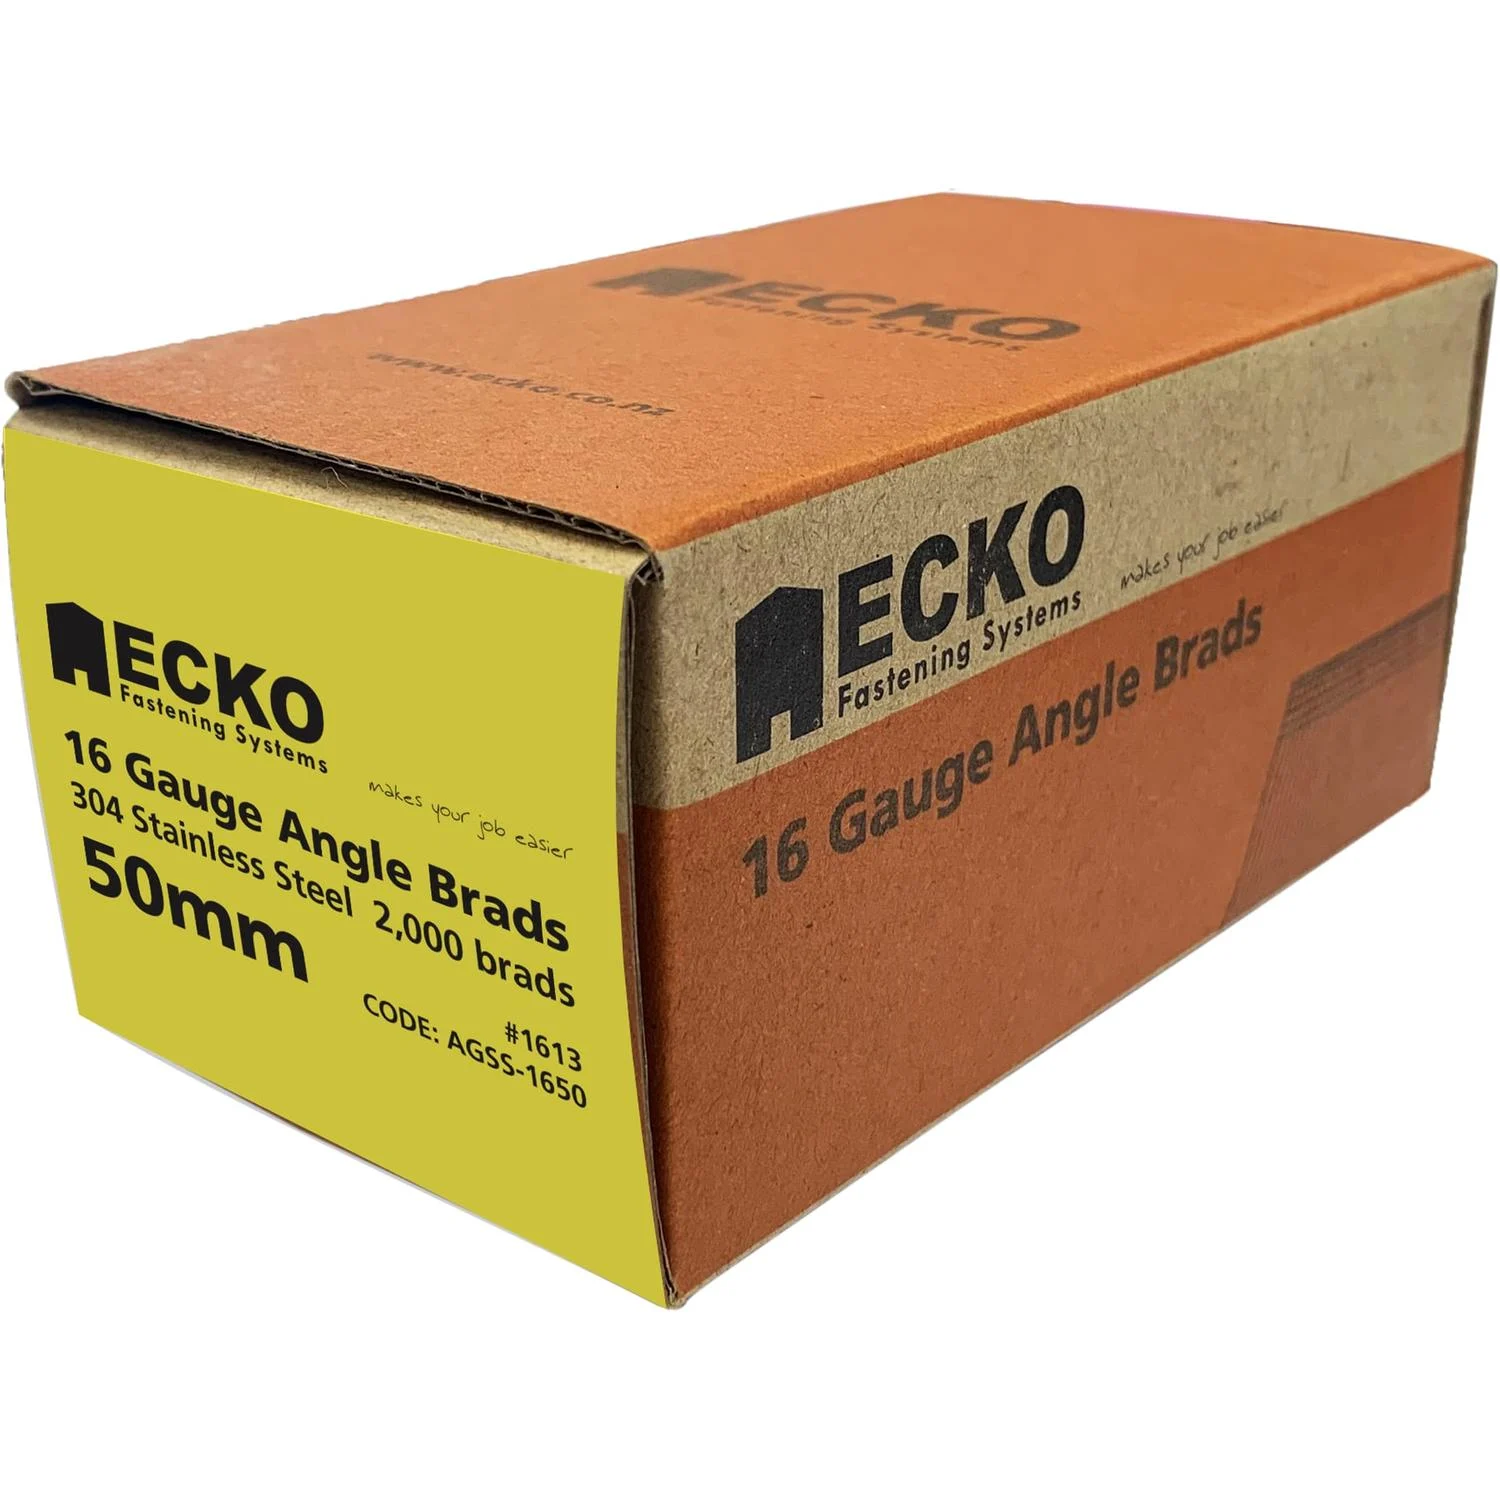 Ecko 16 Gauge Angle Brads Gasless Pack 50 X 1.6Mm 304 Stainless Steel (2000)